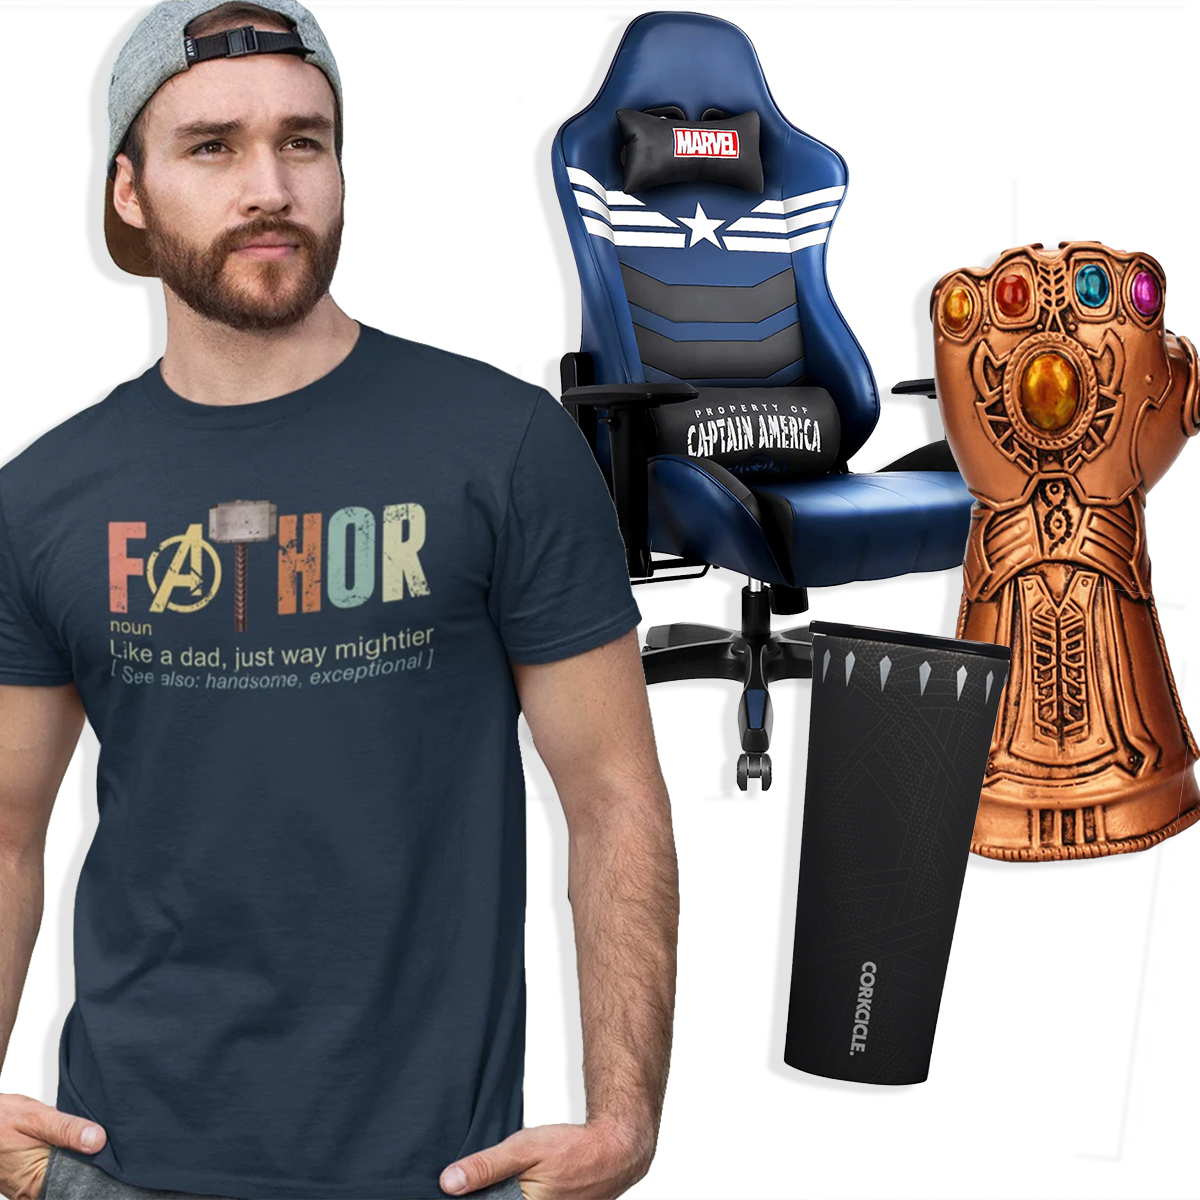 16 Marvel Father’s Day Gifts for the Superhero Dad in Your Life